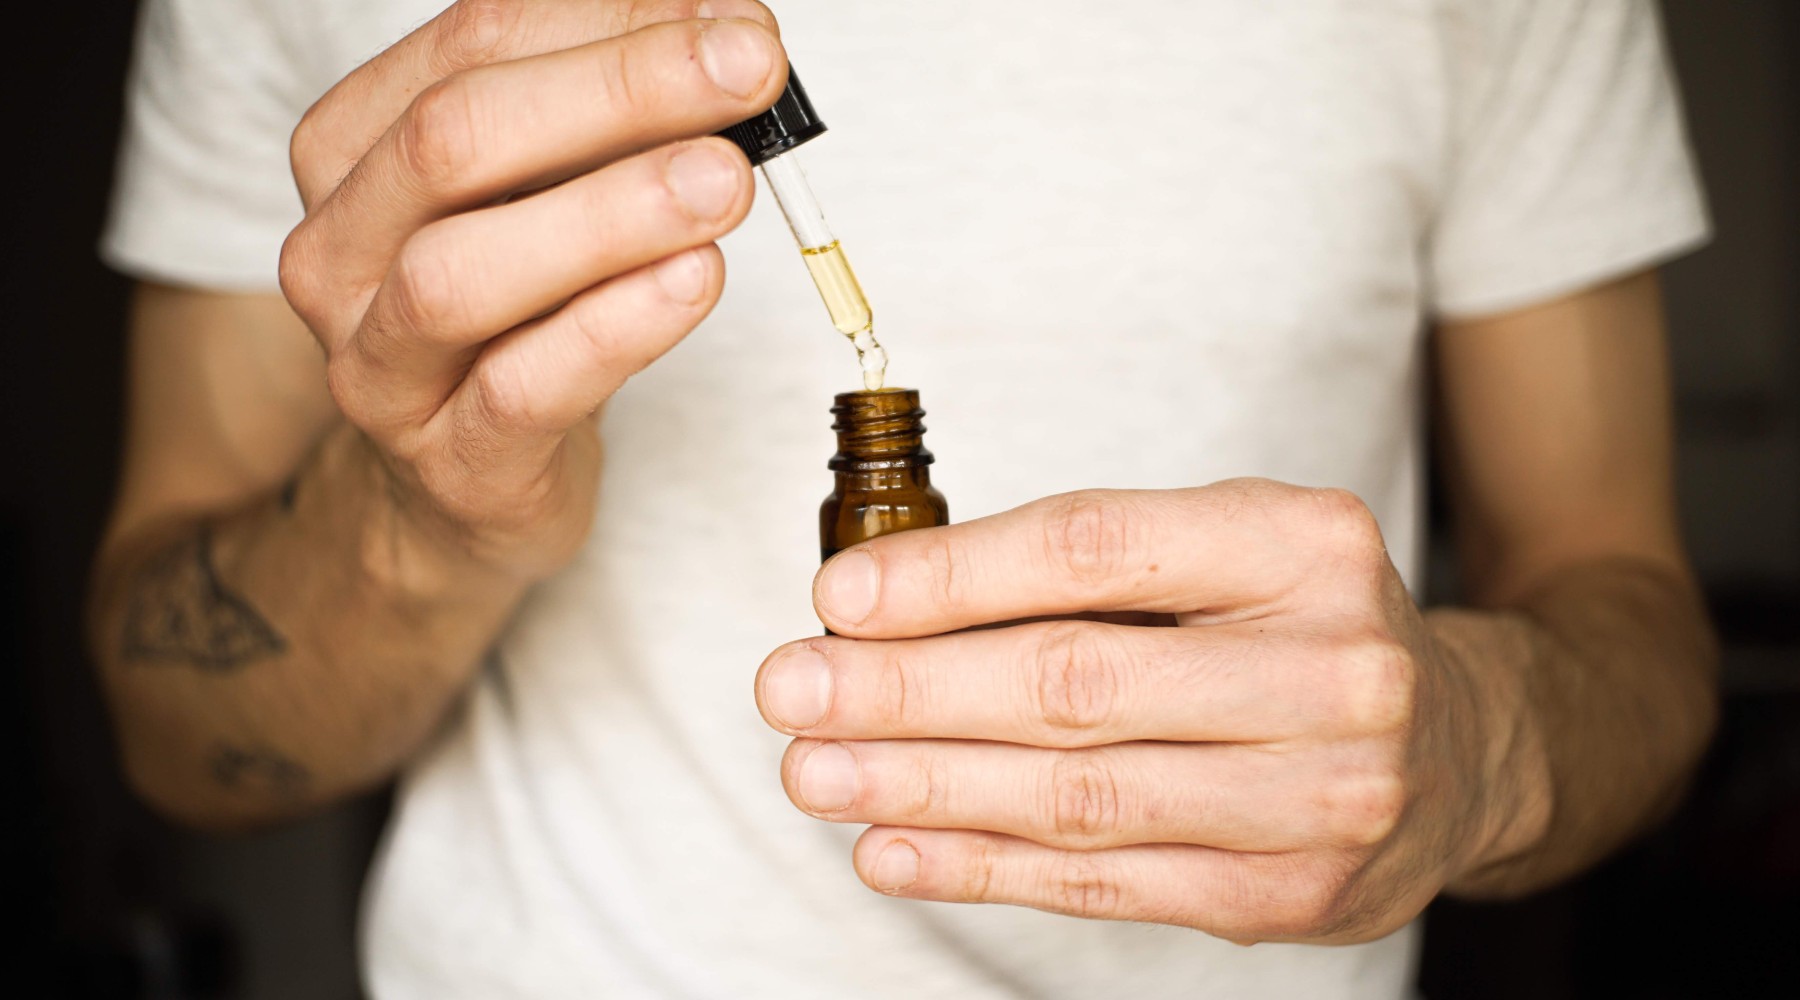 CBD Oil Types: What Are The Different Forms Of CBD?